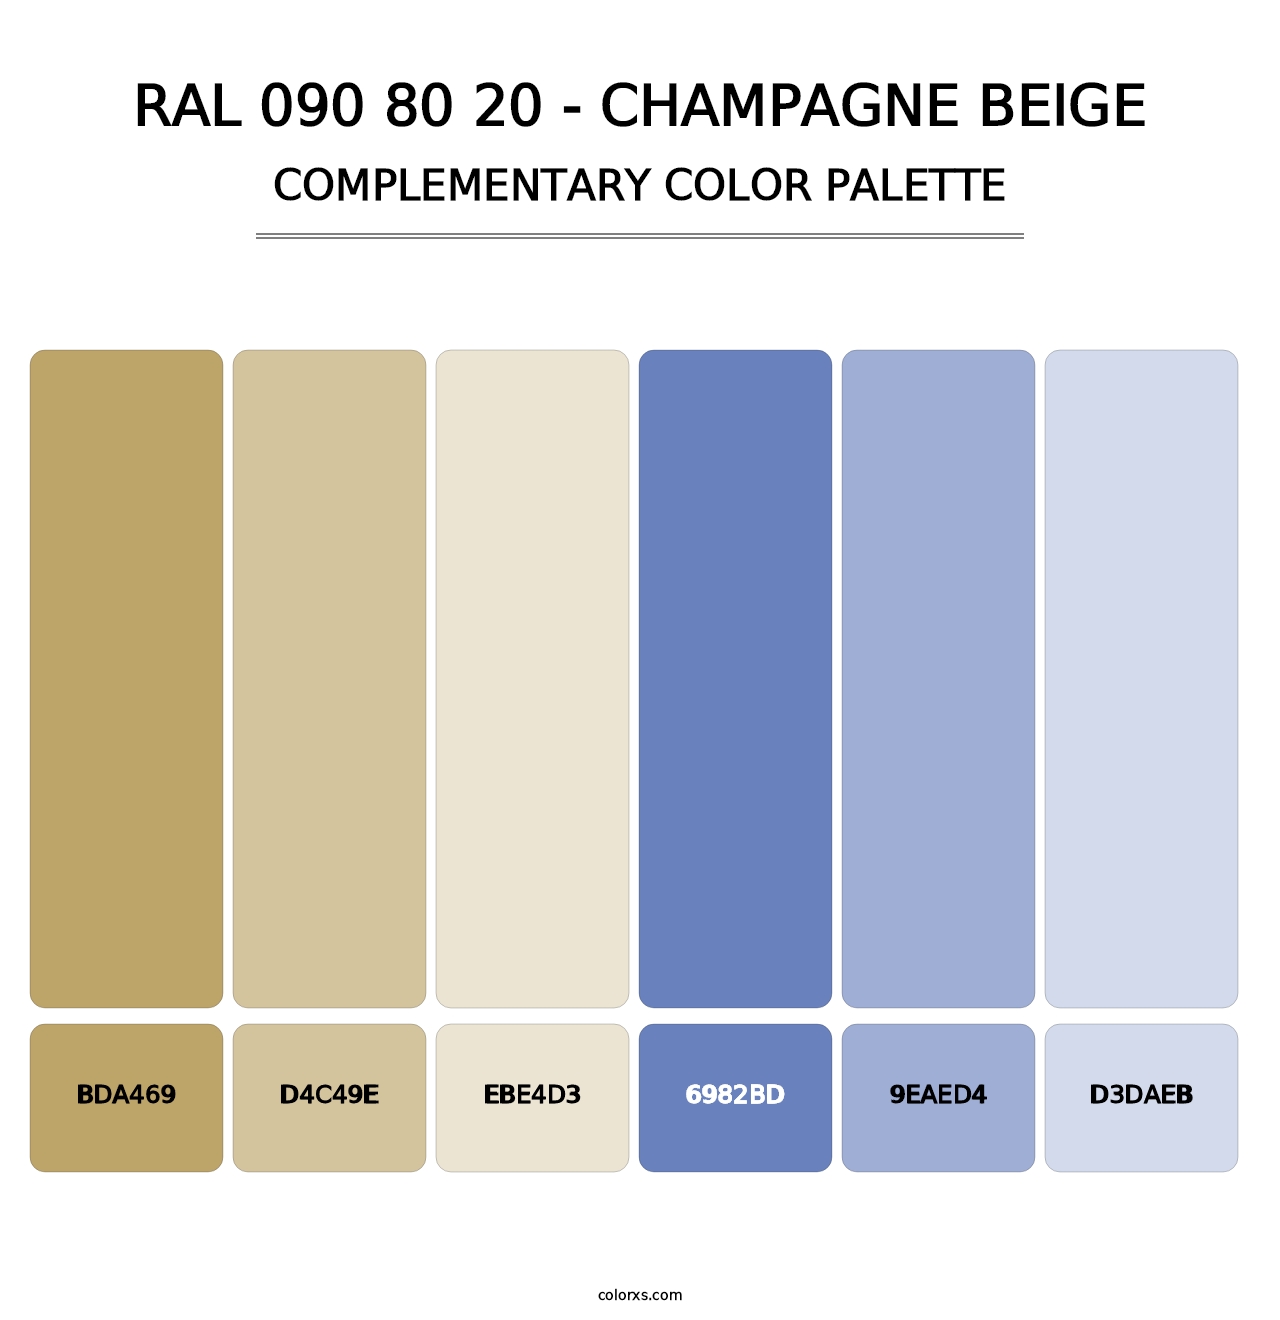 RAL 090 80 20 - Champagne Beige - Complementary Color Palette